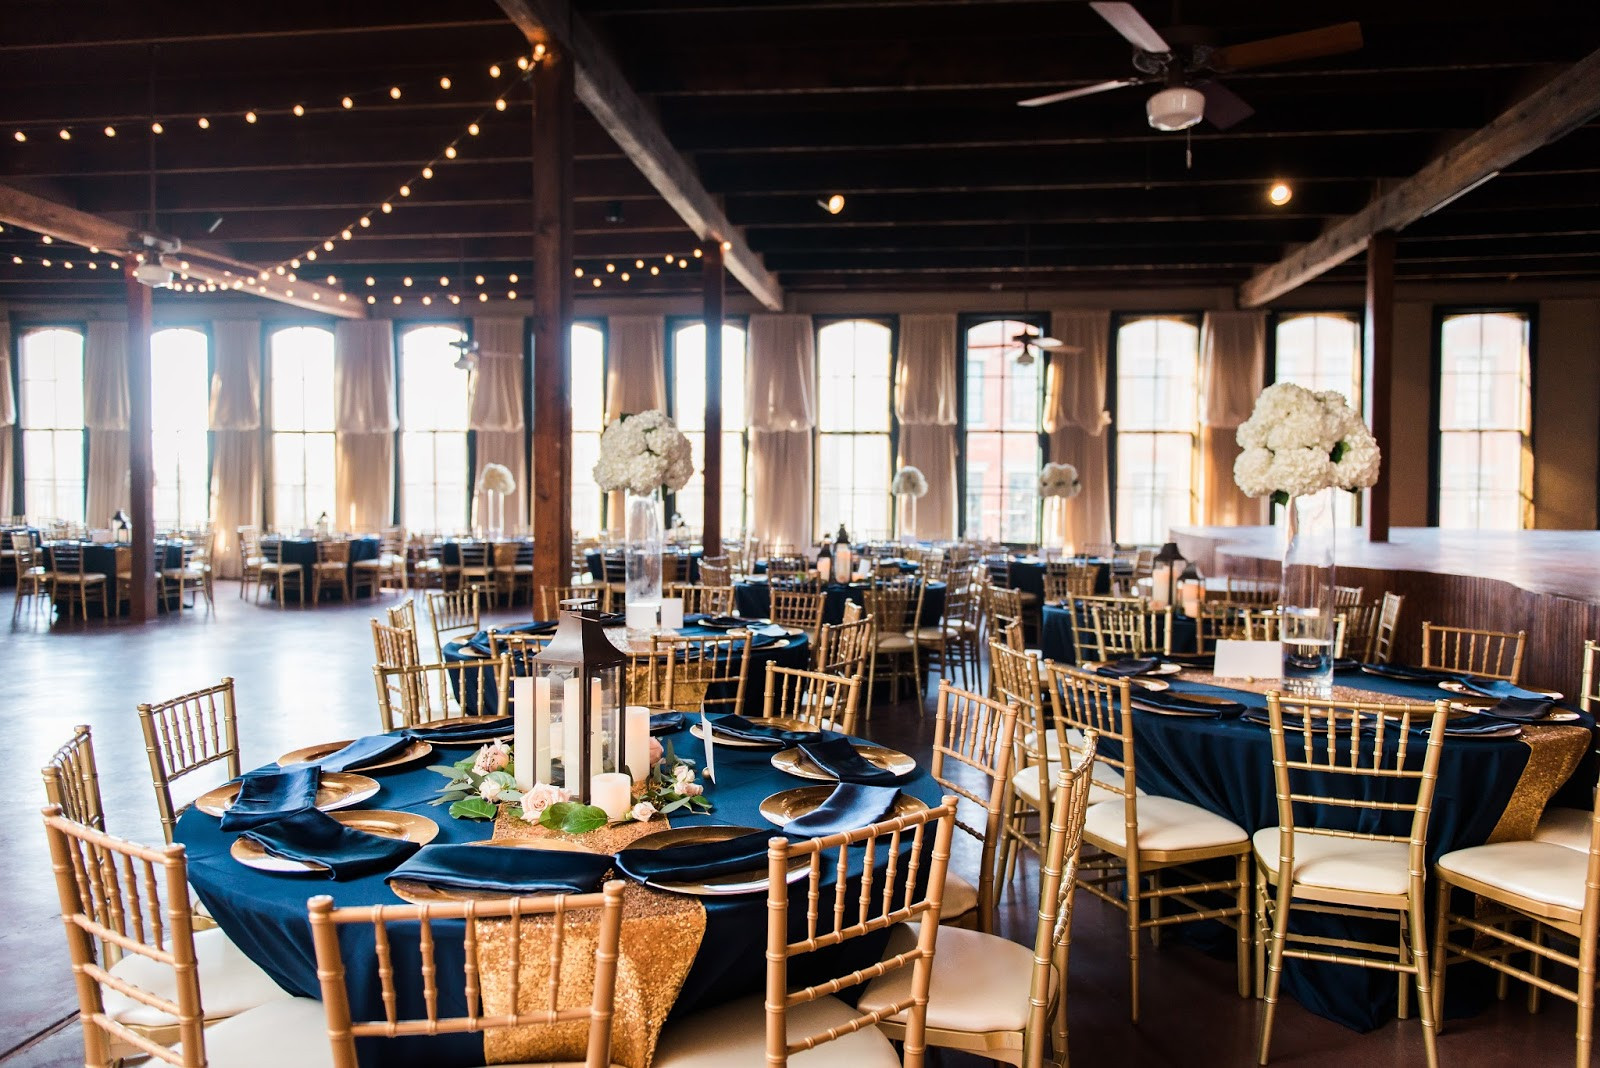 Wedding Venues In Galveston Tx
 Moments with the planner Top 3 Galveston Wedding Venues